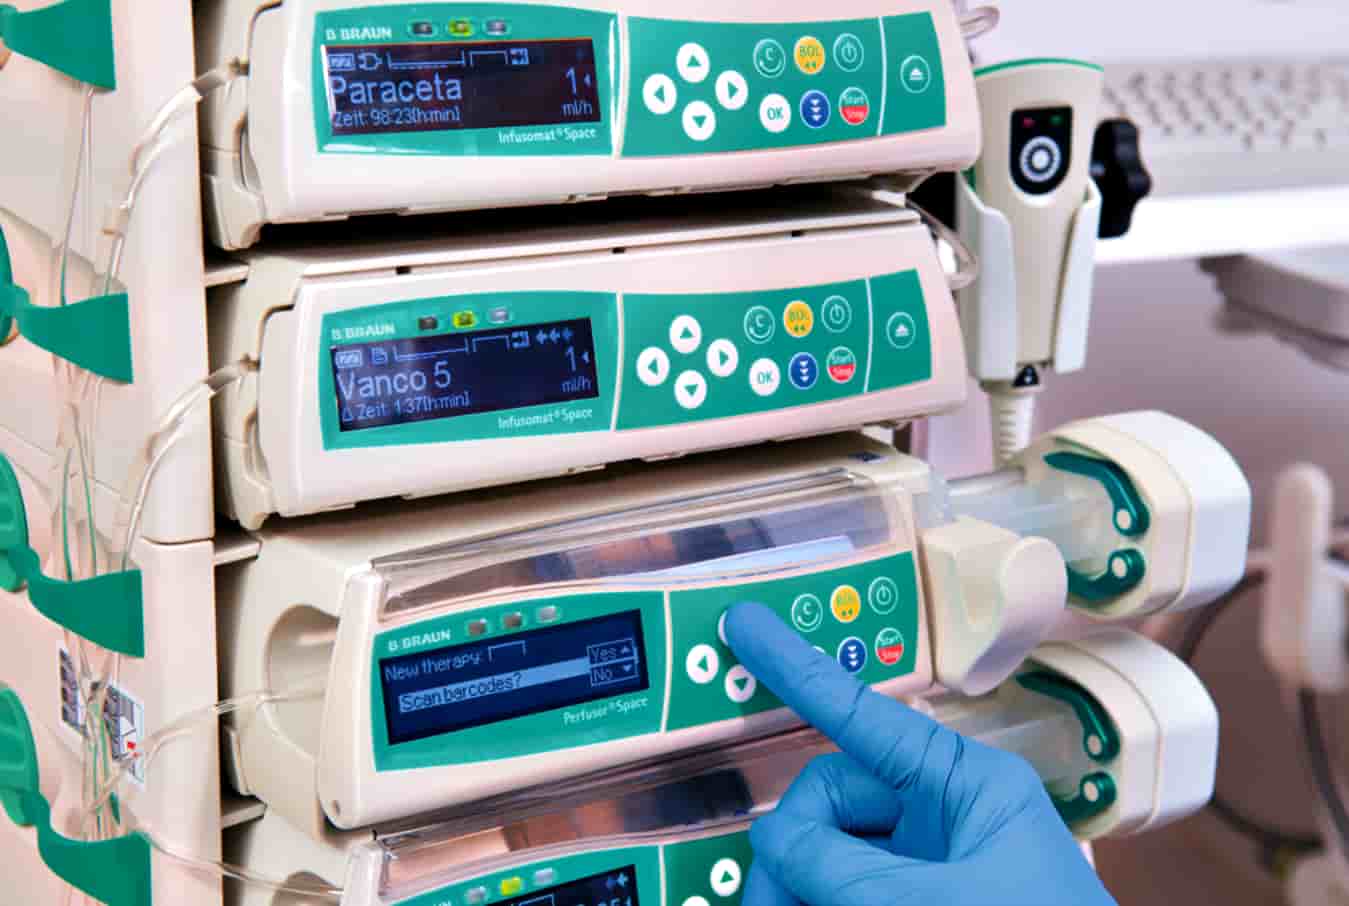 Vulnerability allowed hackers to tamper medication in infusion pump